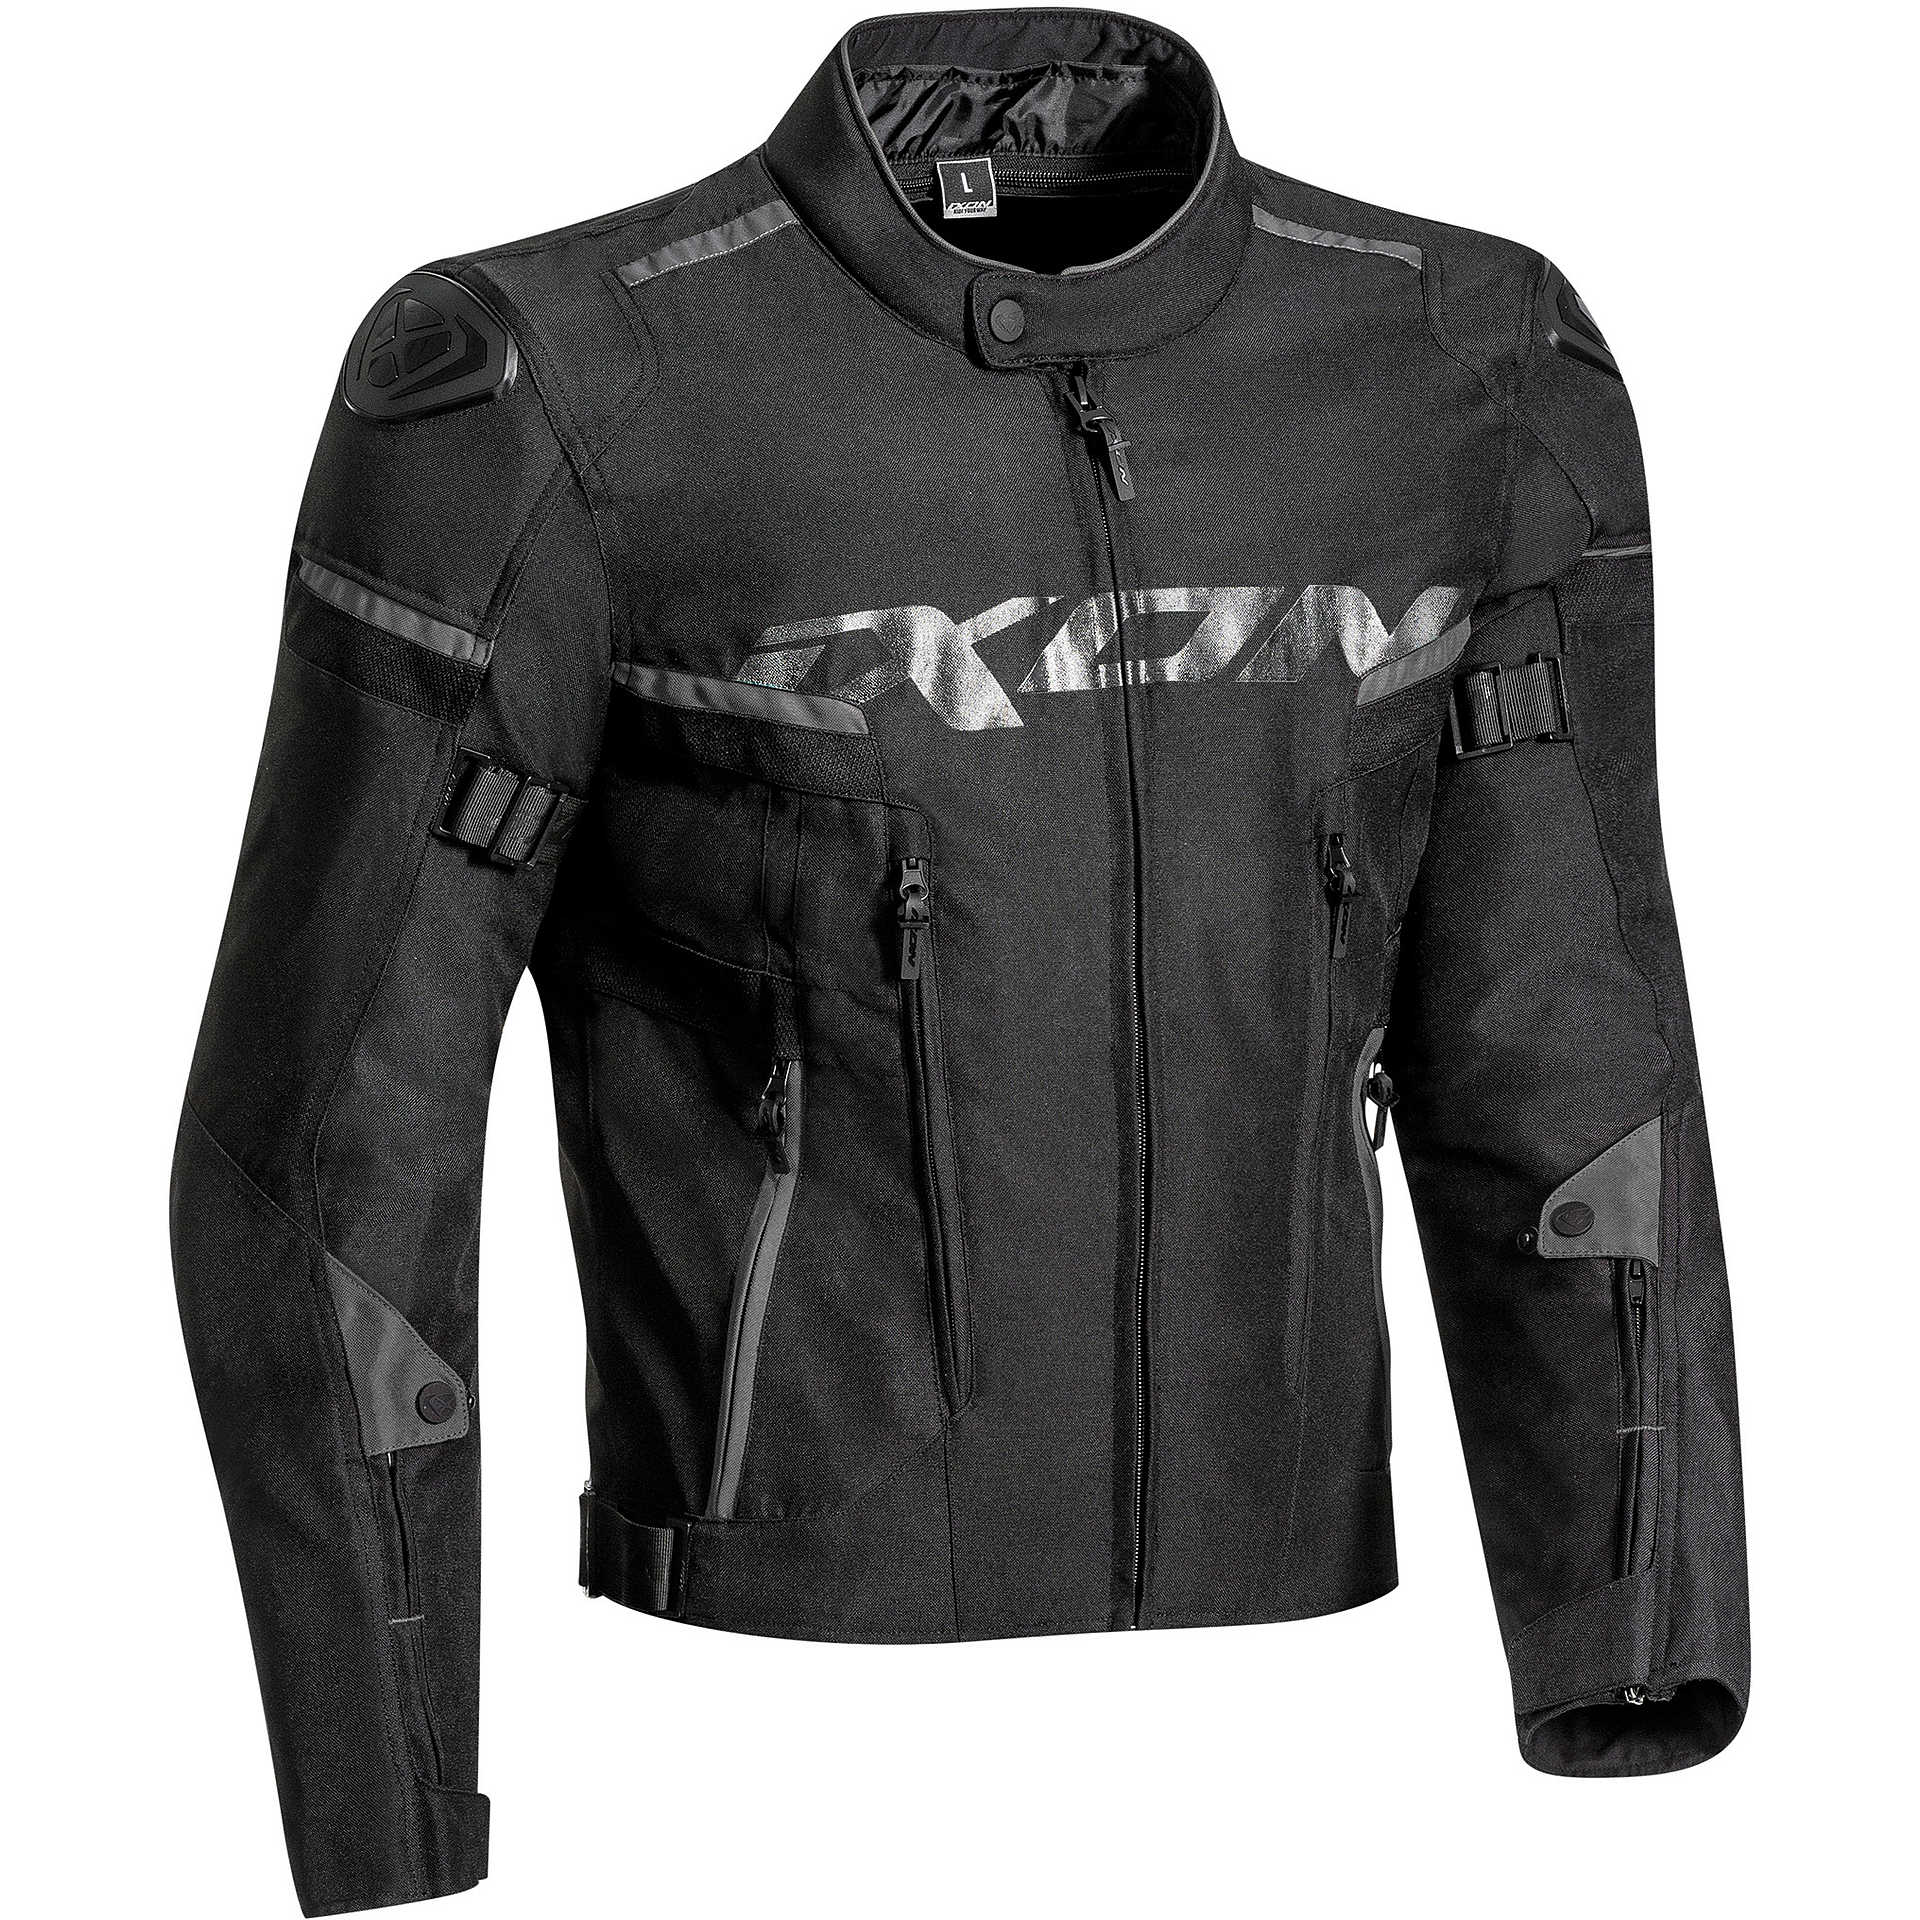 Ixon Sirocco Black Fabric 3 Layer Motorcycle Jacket For Sale Online ...